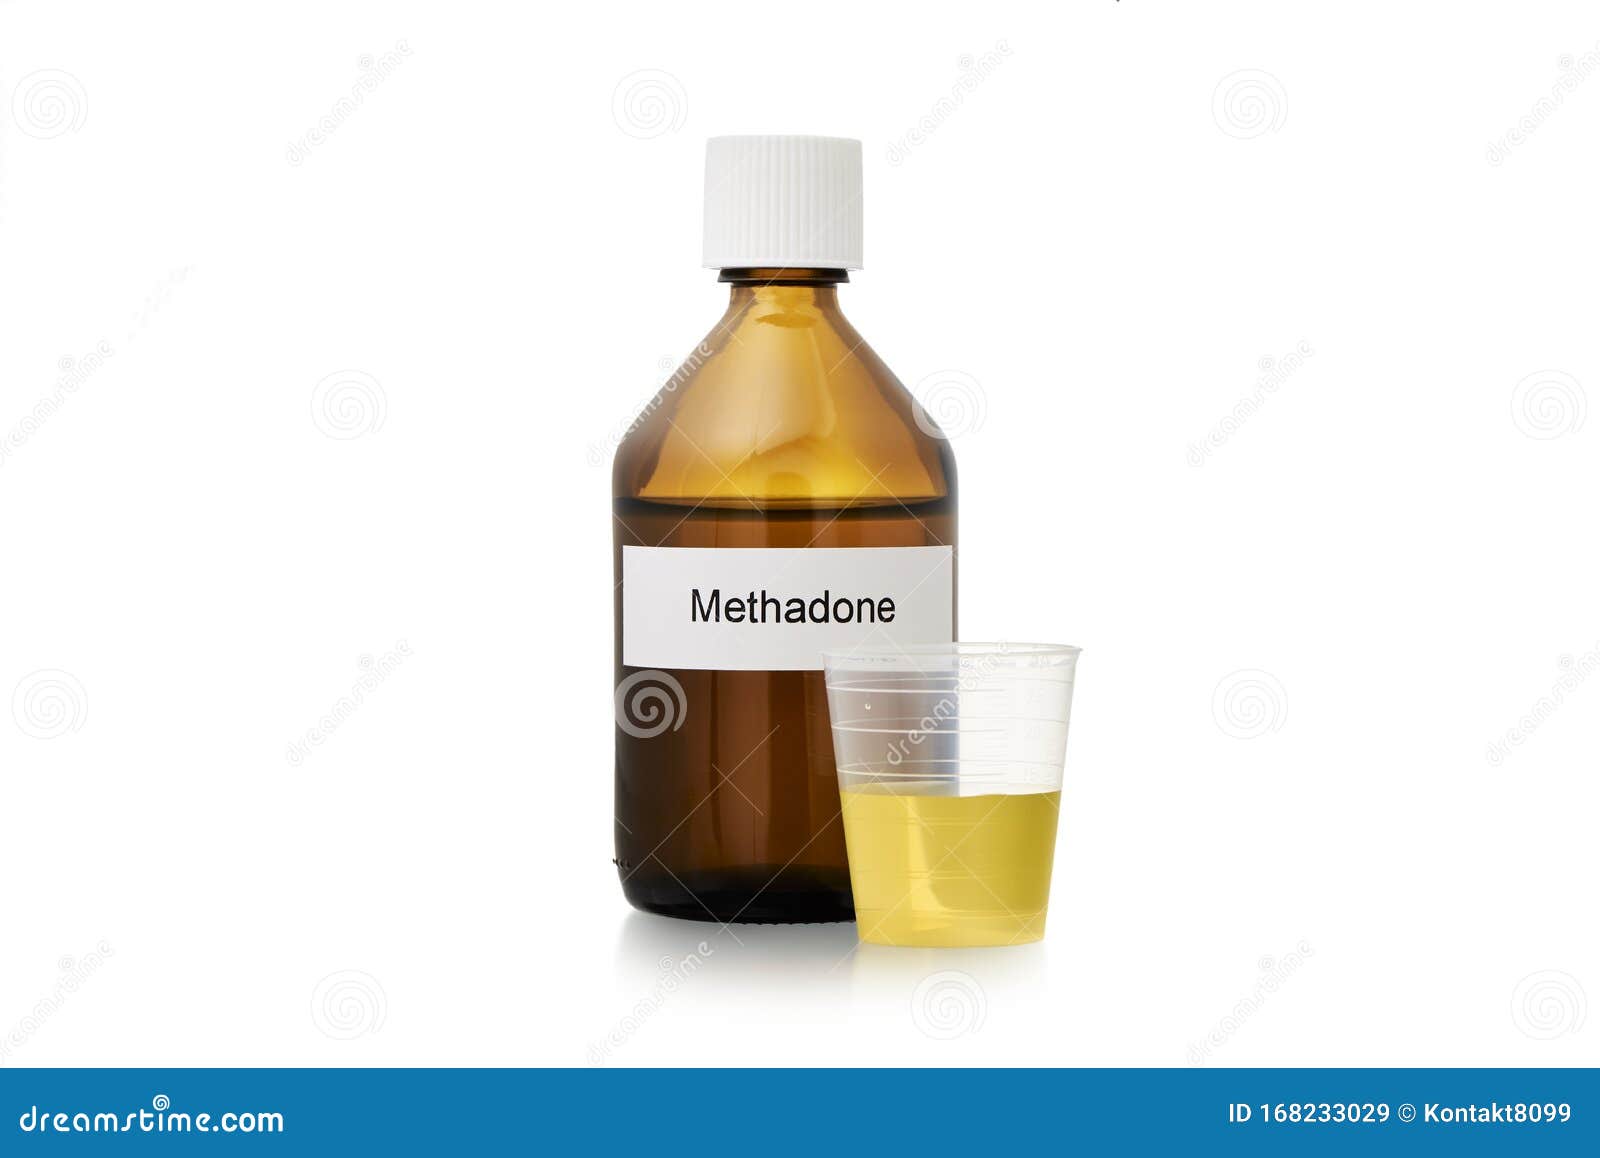 methadone - a brown medicine bottle with white lid and a white label. a dosing cup filled with metadon